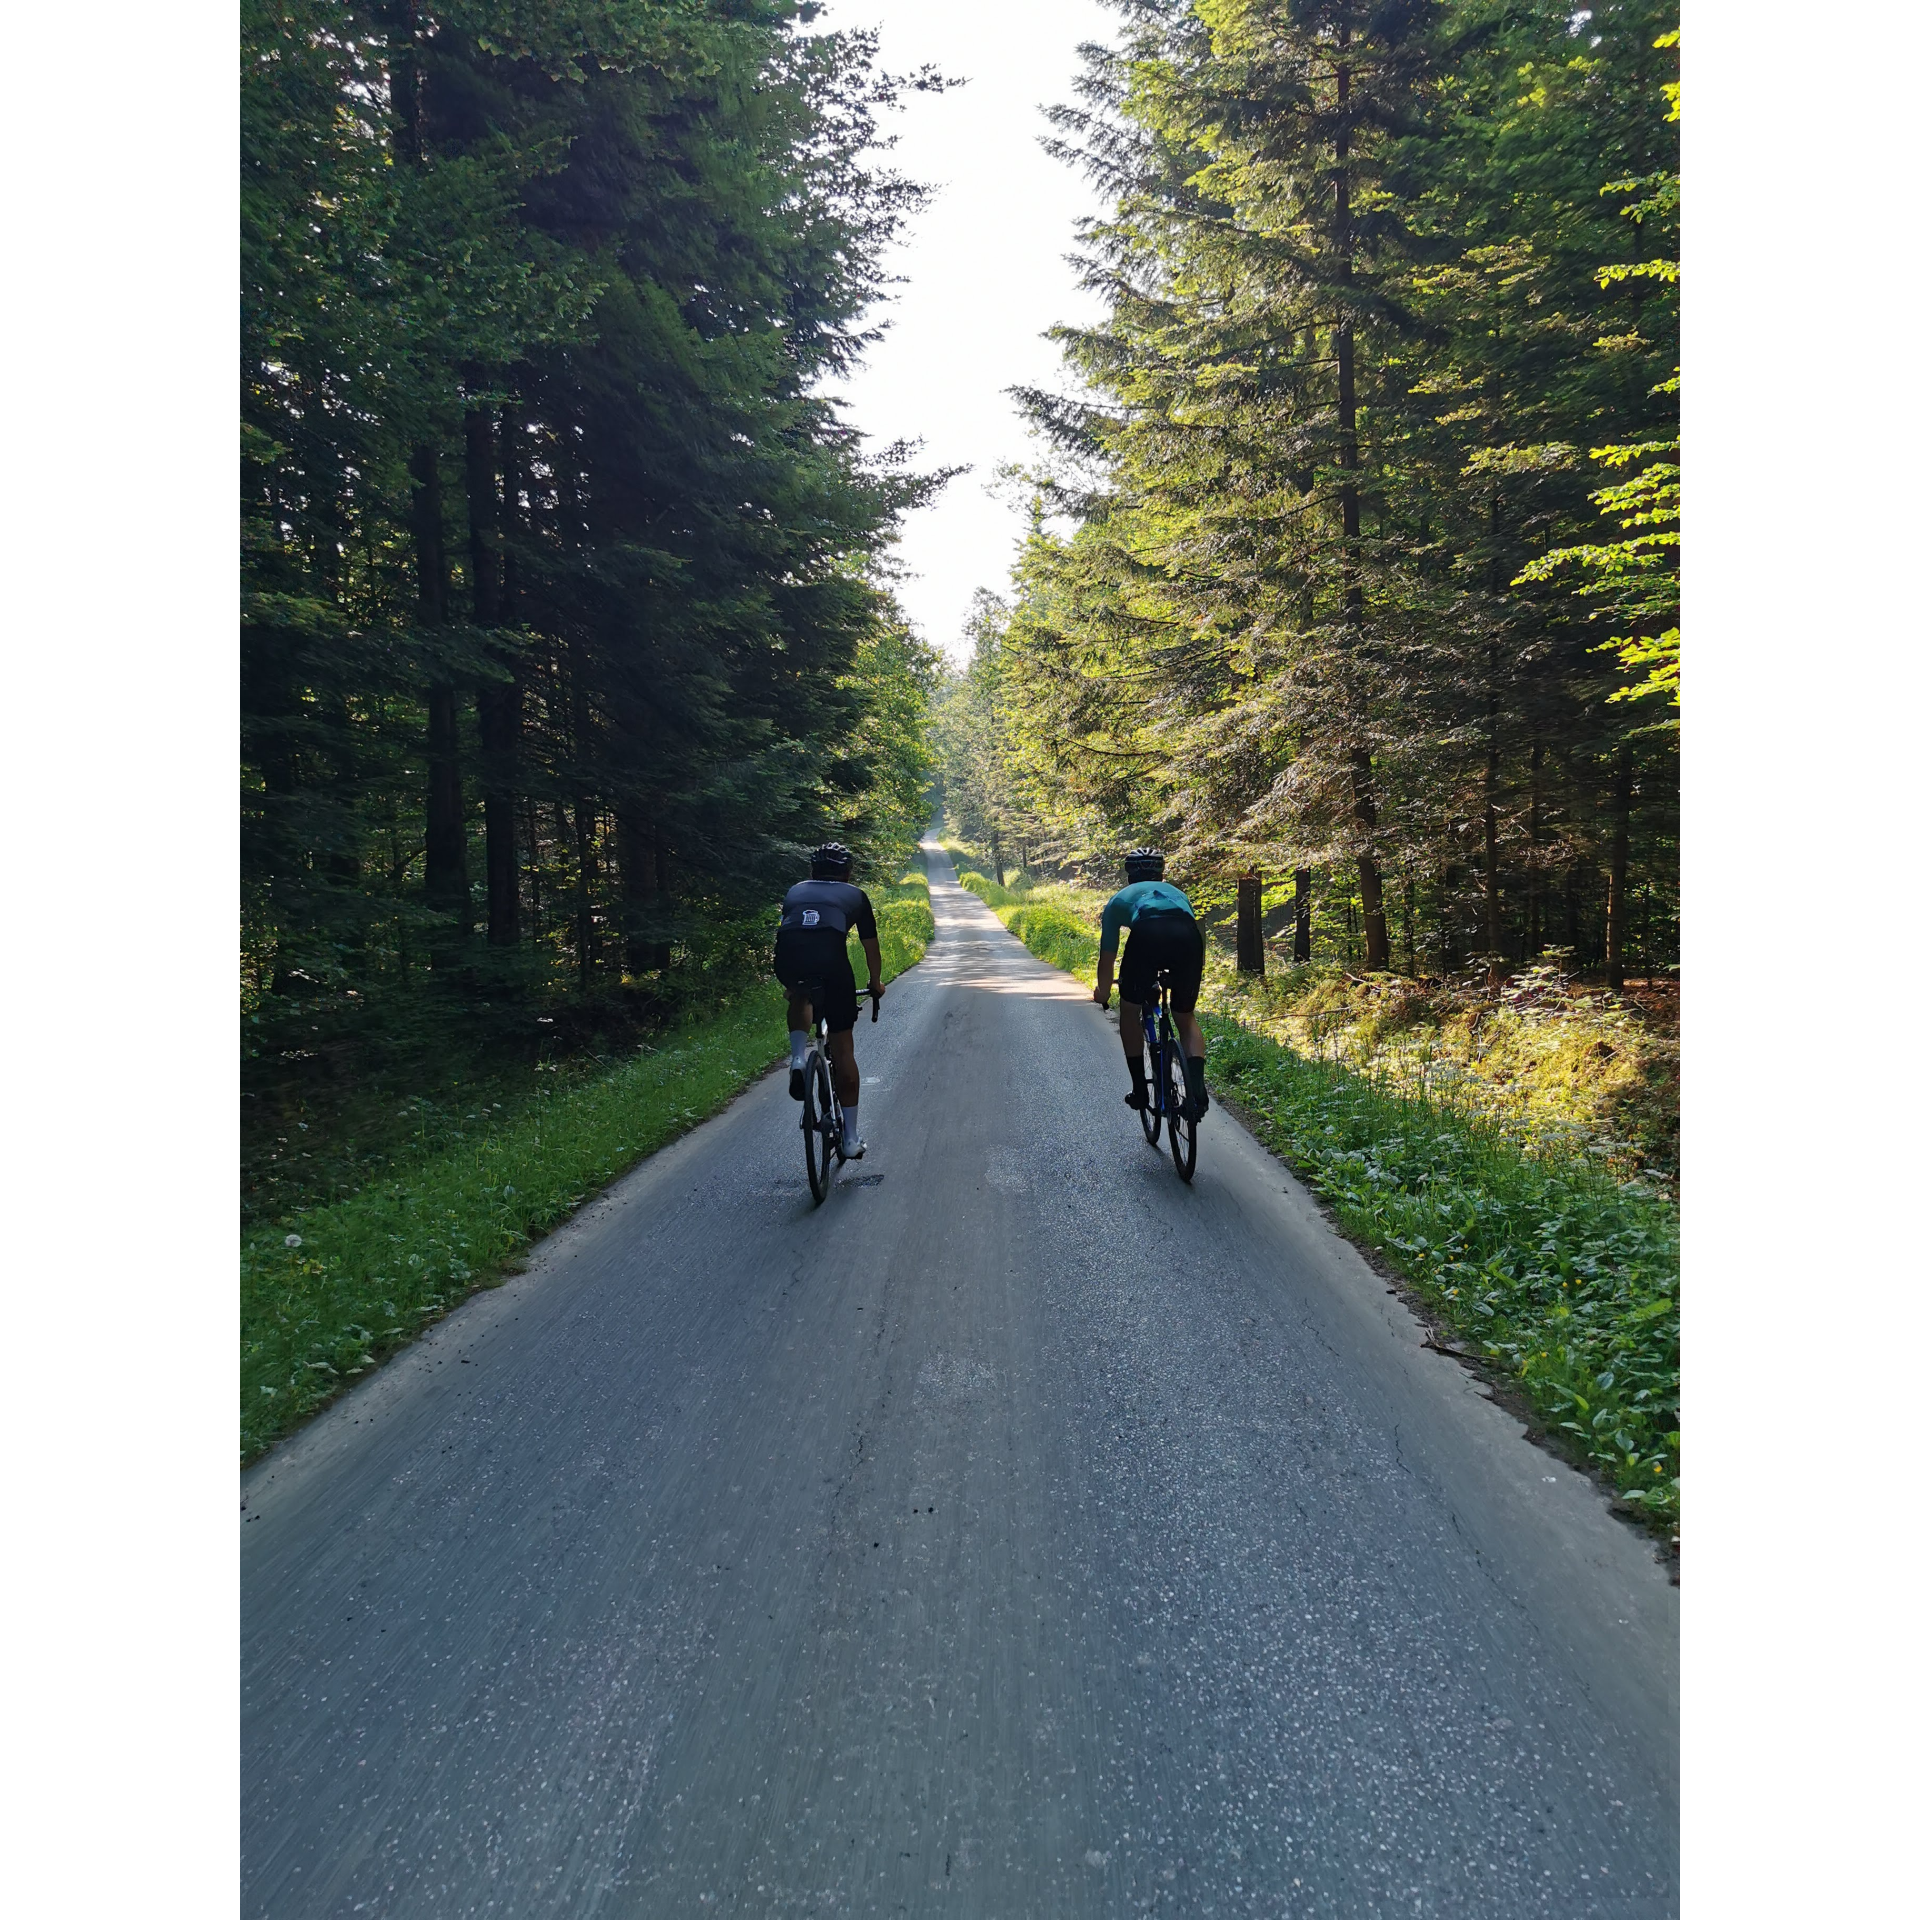 Two cyclists in cycling clothes cycling on an asphalt road leading through the forest